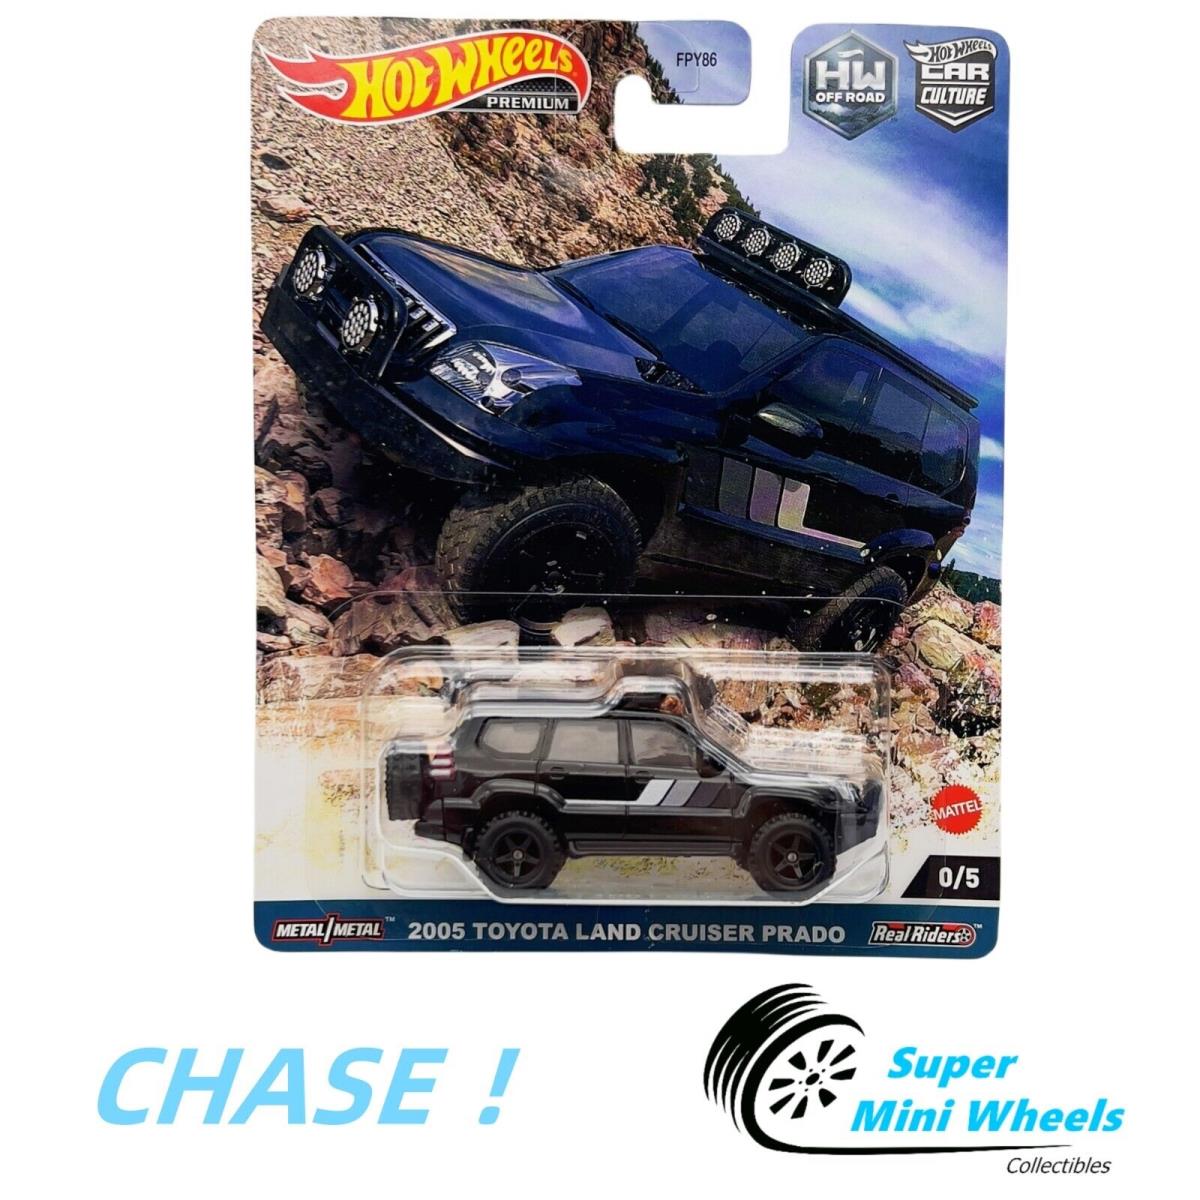 Chase Hot Wheels Car Culture 2005 Toyota Land Cruiser Prado with Case Protector - Black